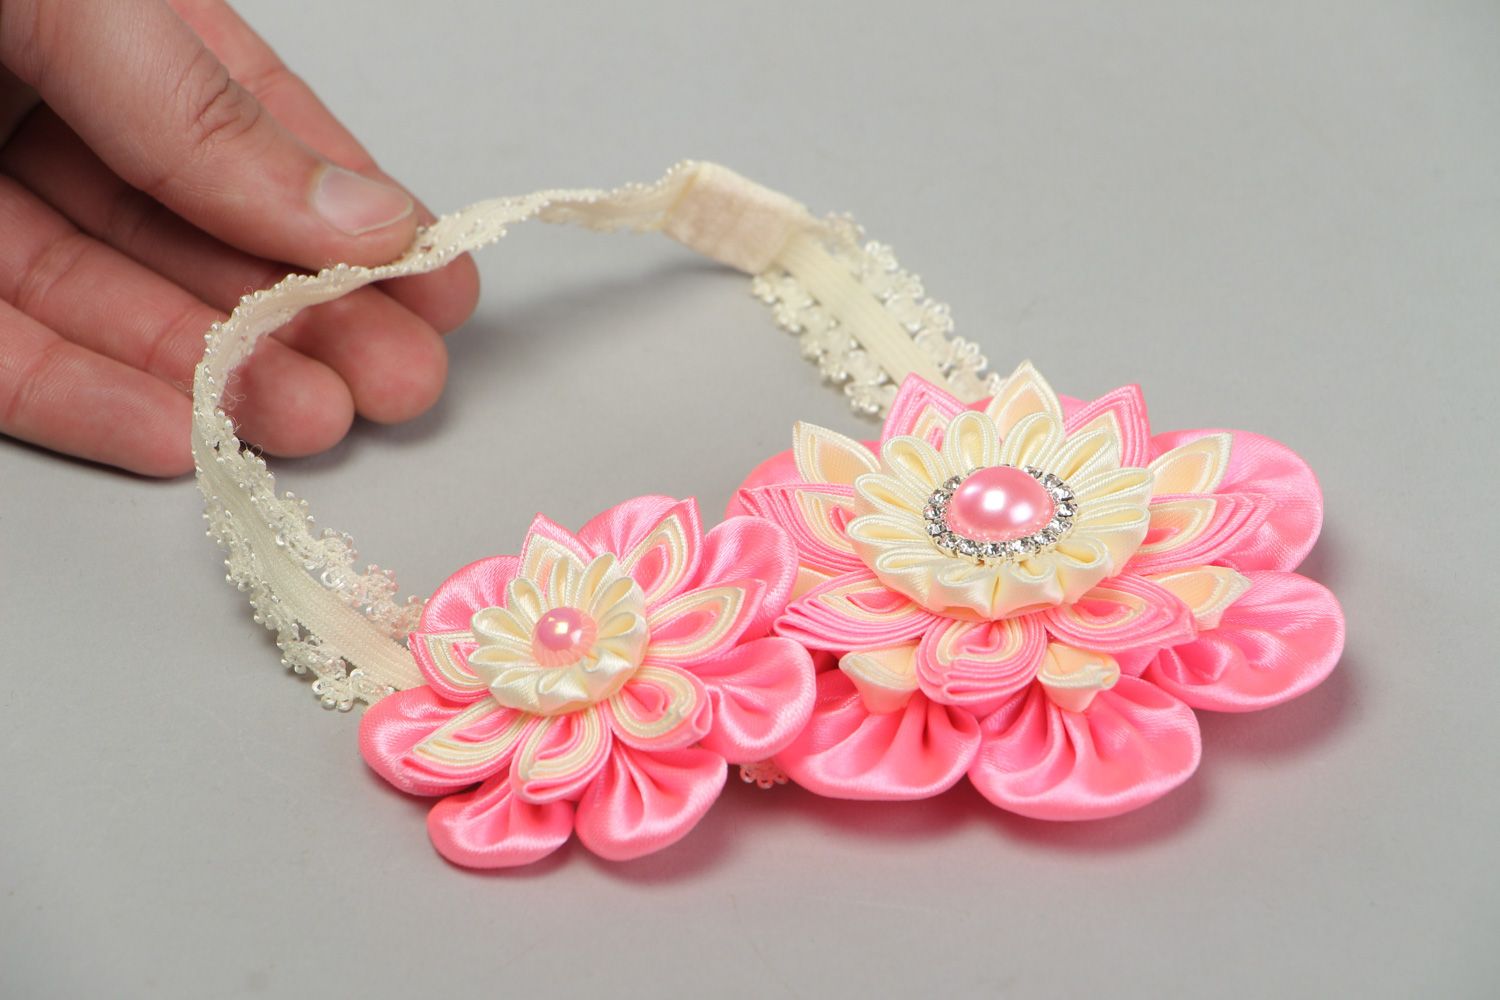 Handmade designer headband with satin ribbon flower in pink and cream colors photo 4